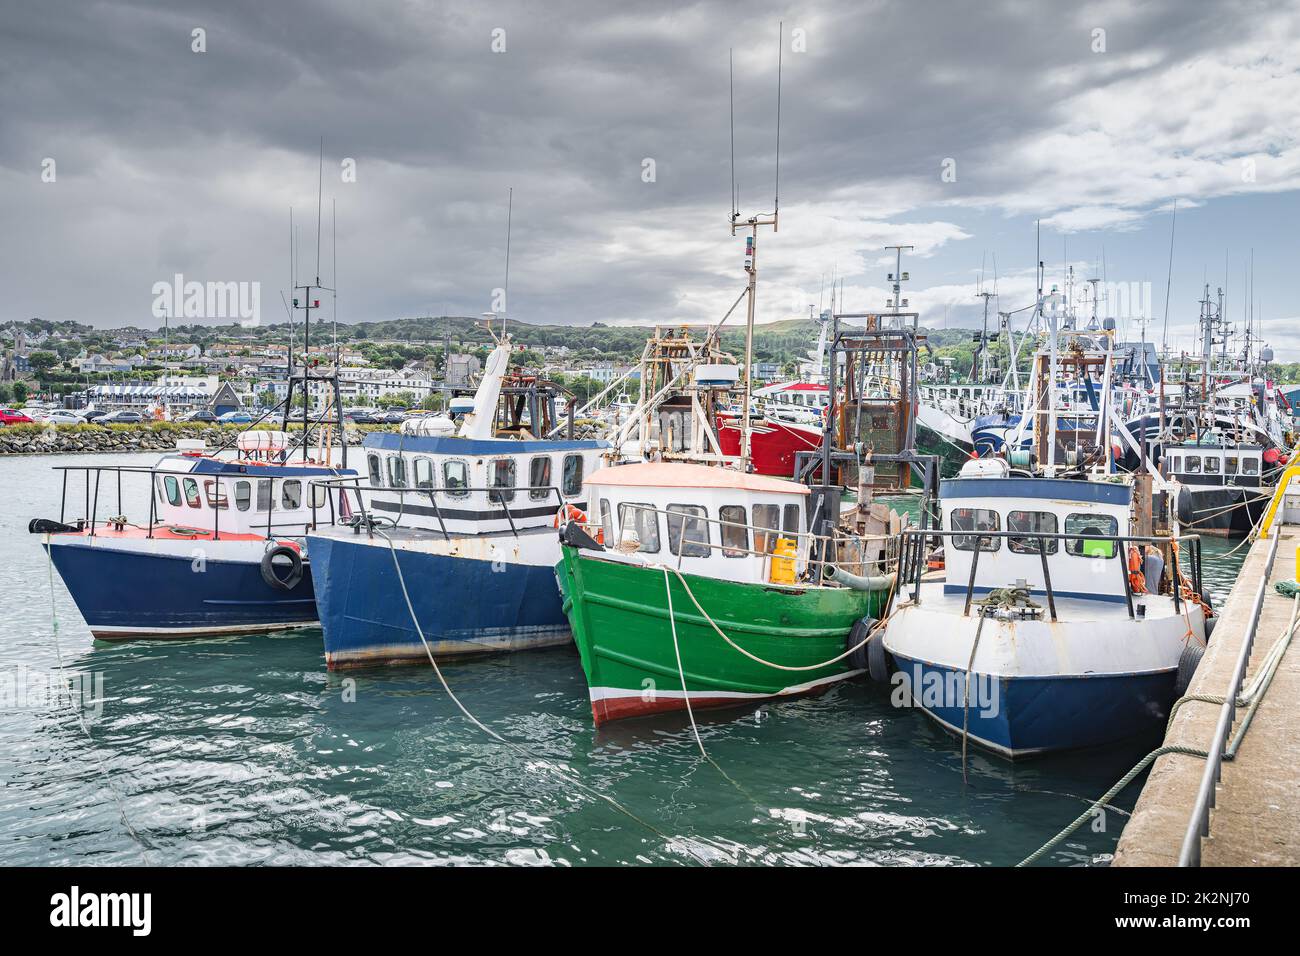 Four small fishing boats moored in Howth harbour, Dublin, Ireland Stock Photo